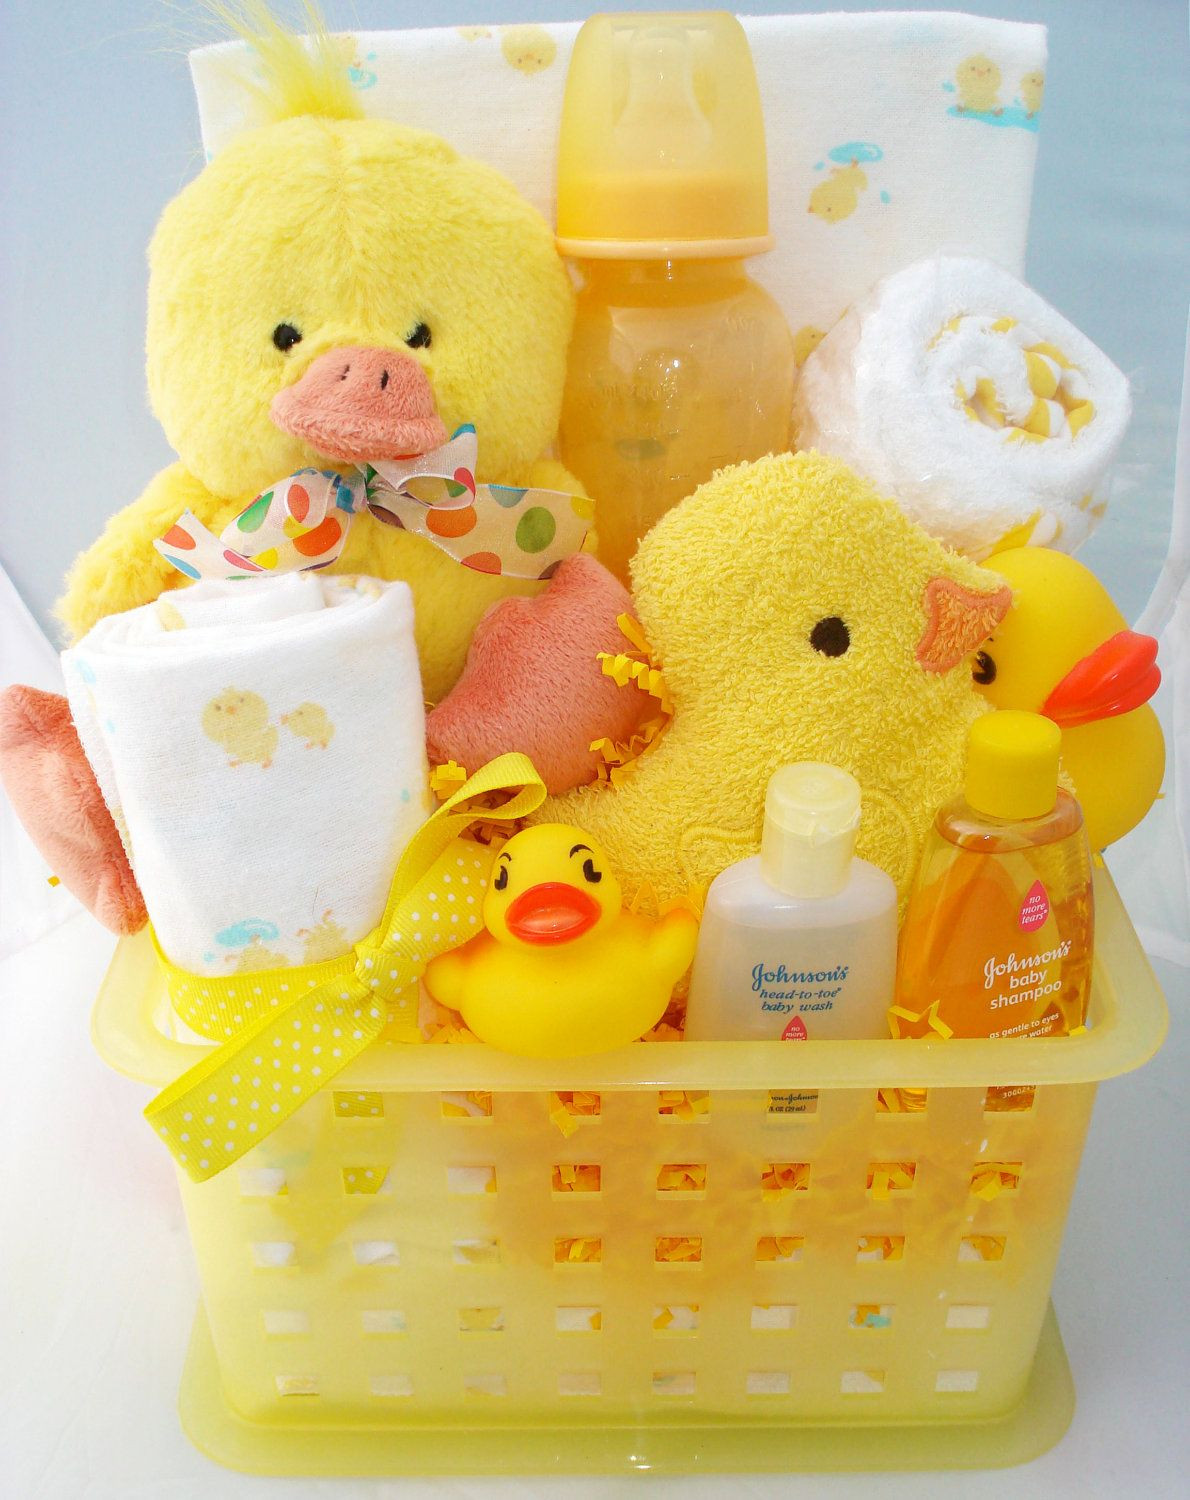 Cute Baby Shower Gift Basket Ideas
 Pin on Baby Diaper Washcloth Gifts & Baby Shower Ideas